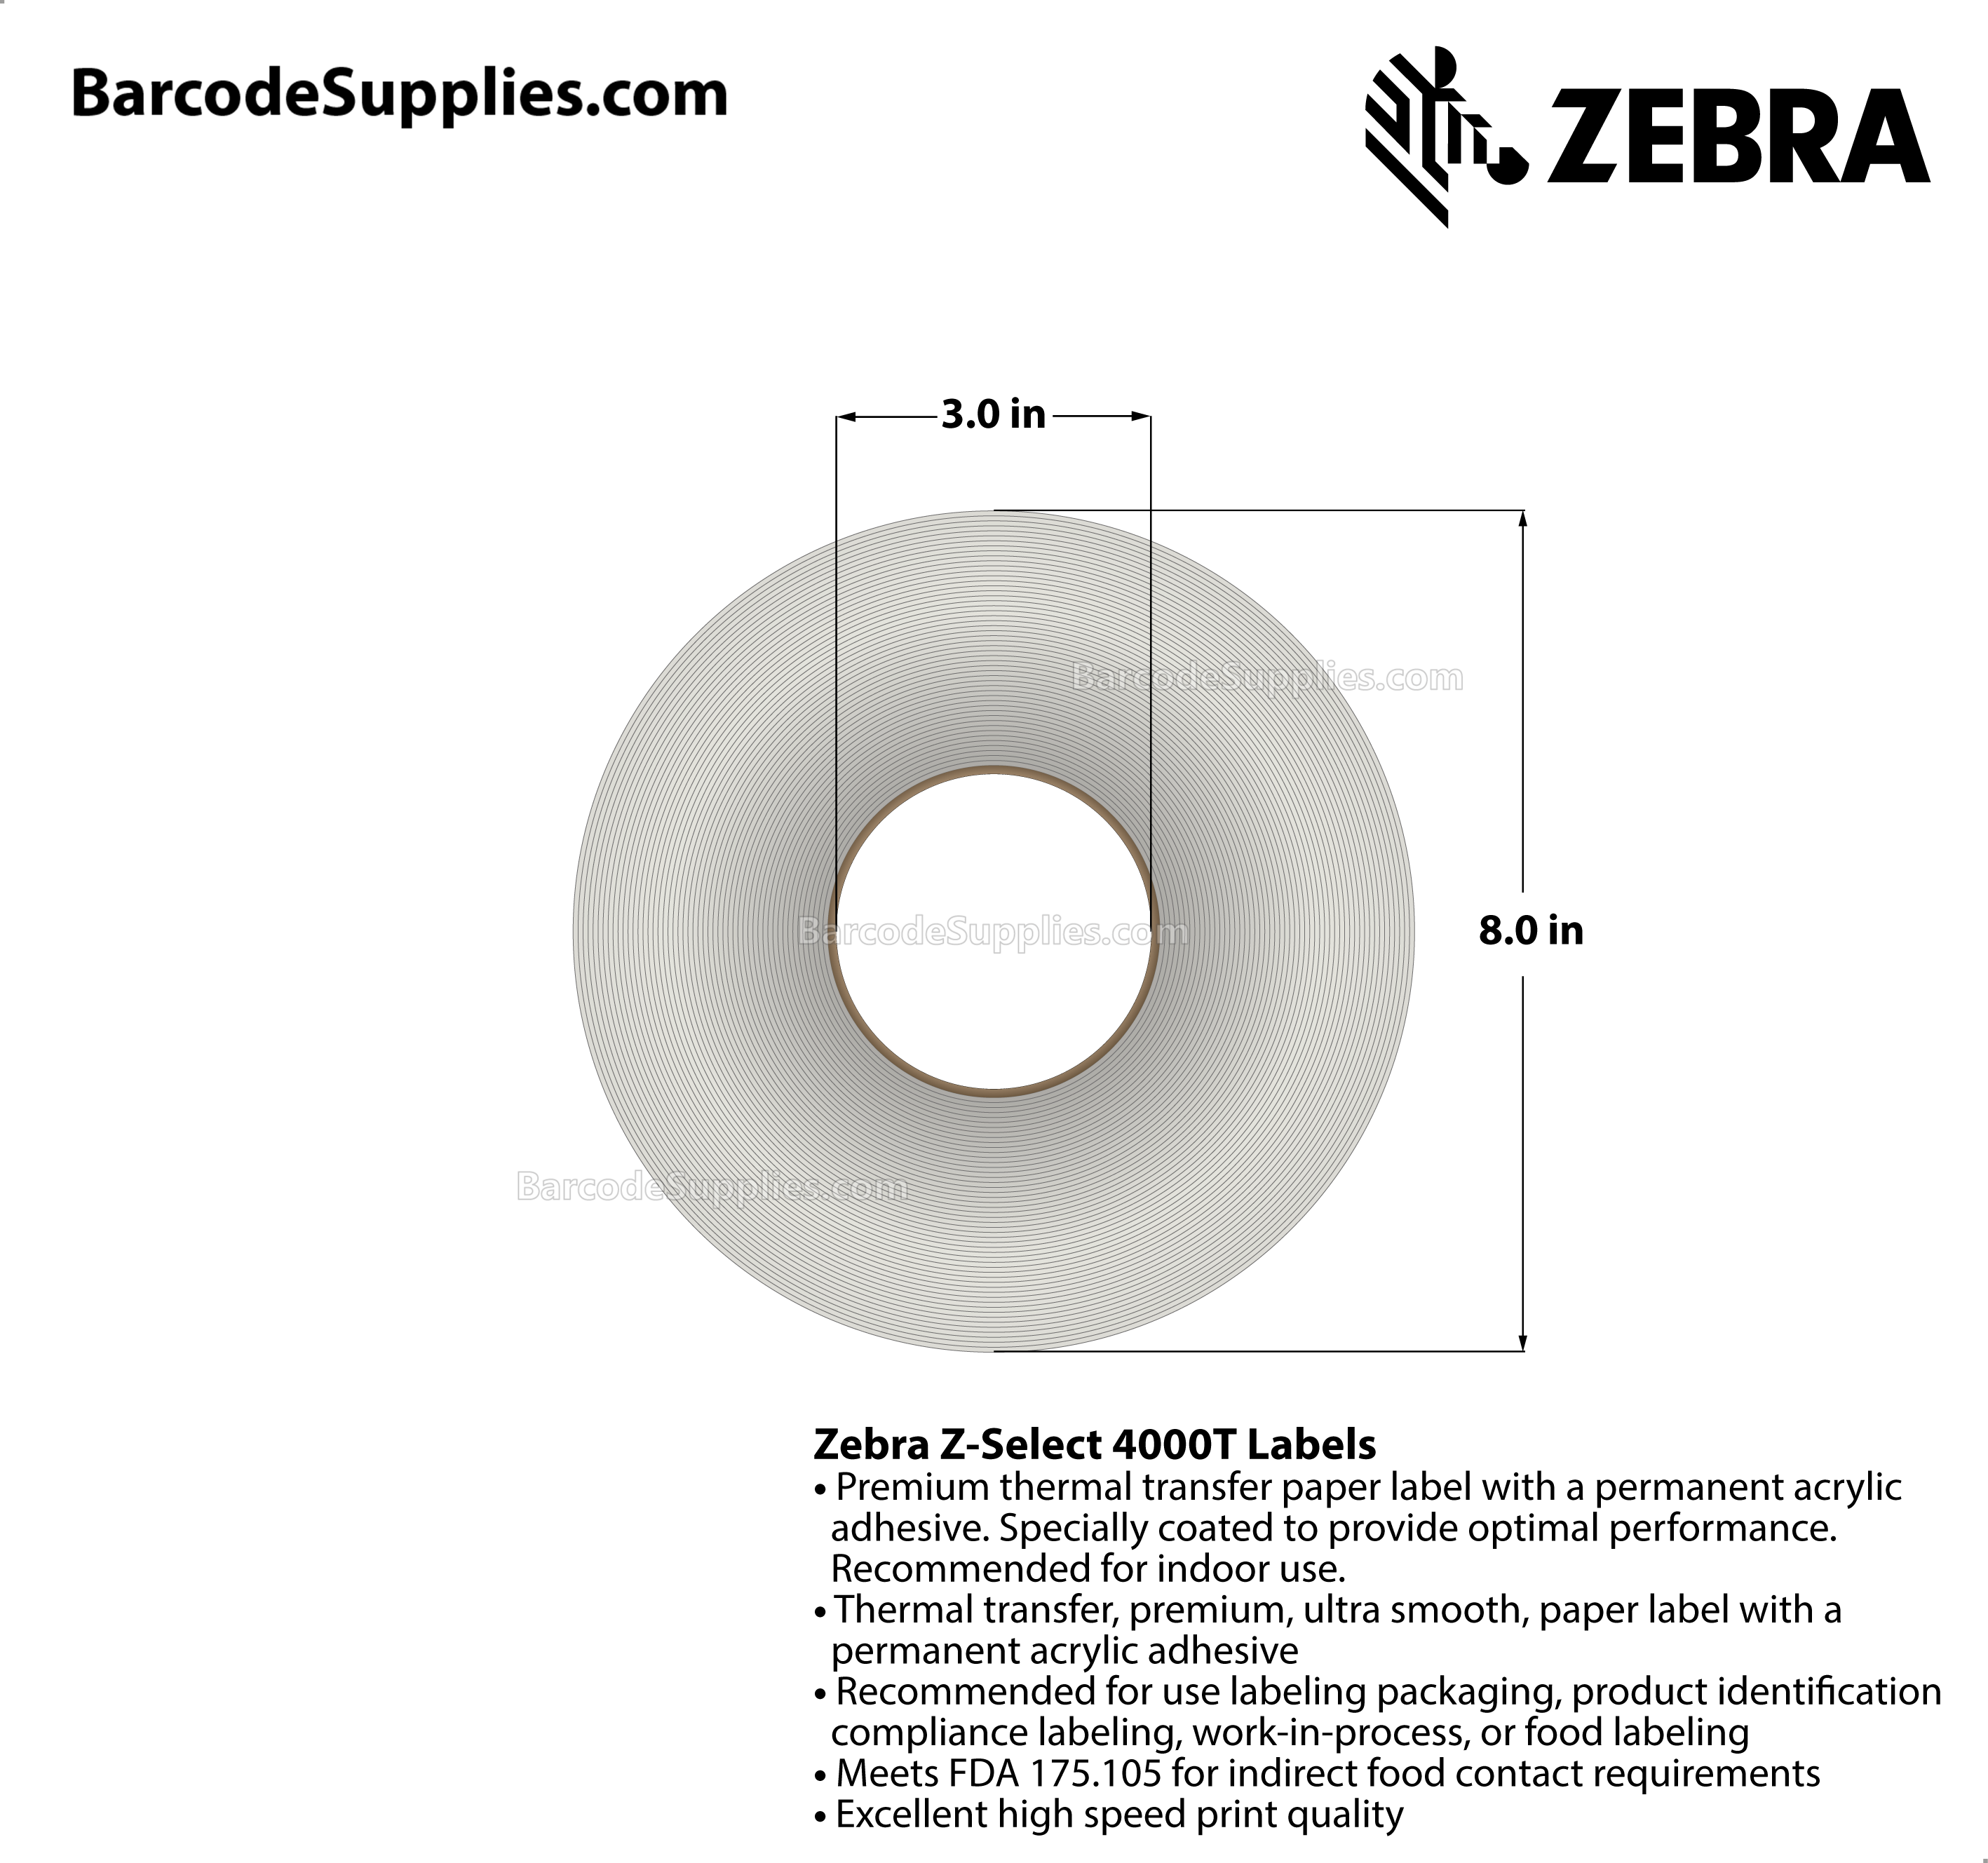 2.25 x 2 Thermal Transfer White Z-Select 4000T Labels With Permanent Adhesive - Perforated - 3292 Labels Per Roll - Carton Of 4 Rolls - 13168 Labels Total - MPN: 800622-205